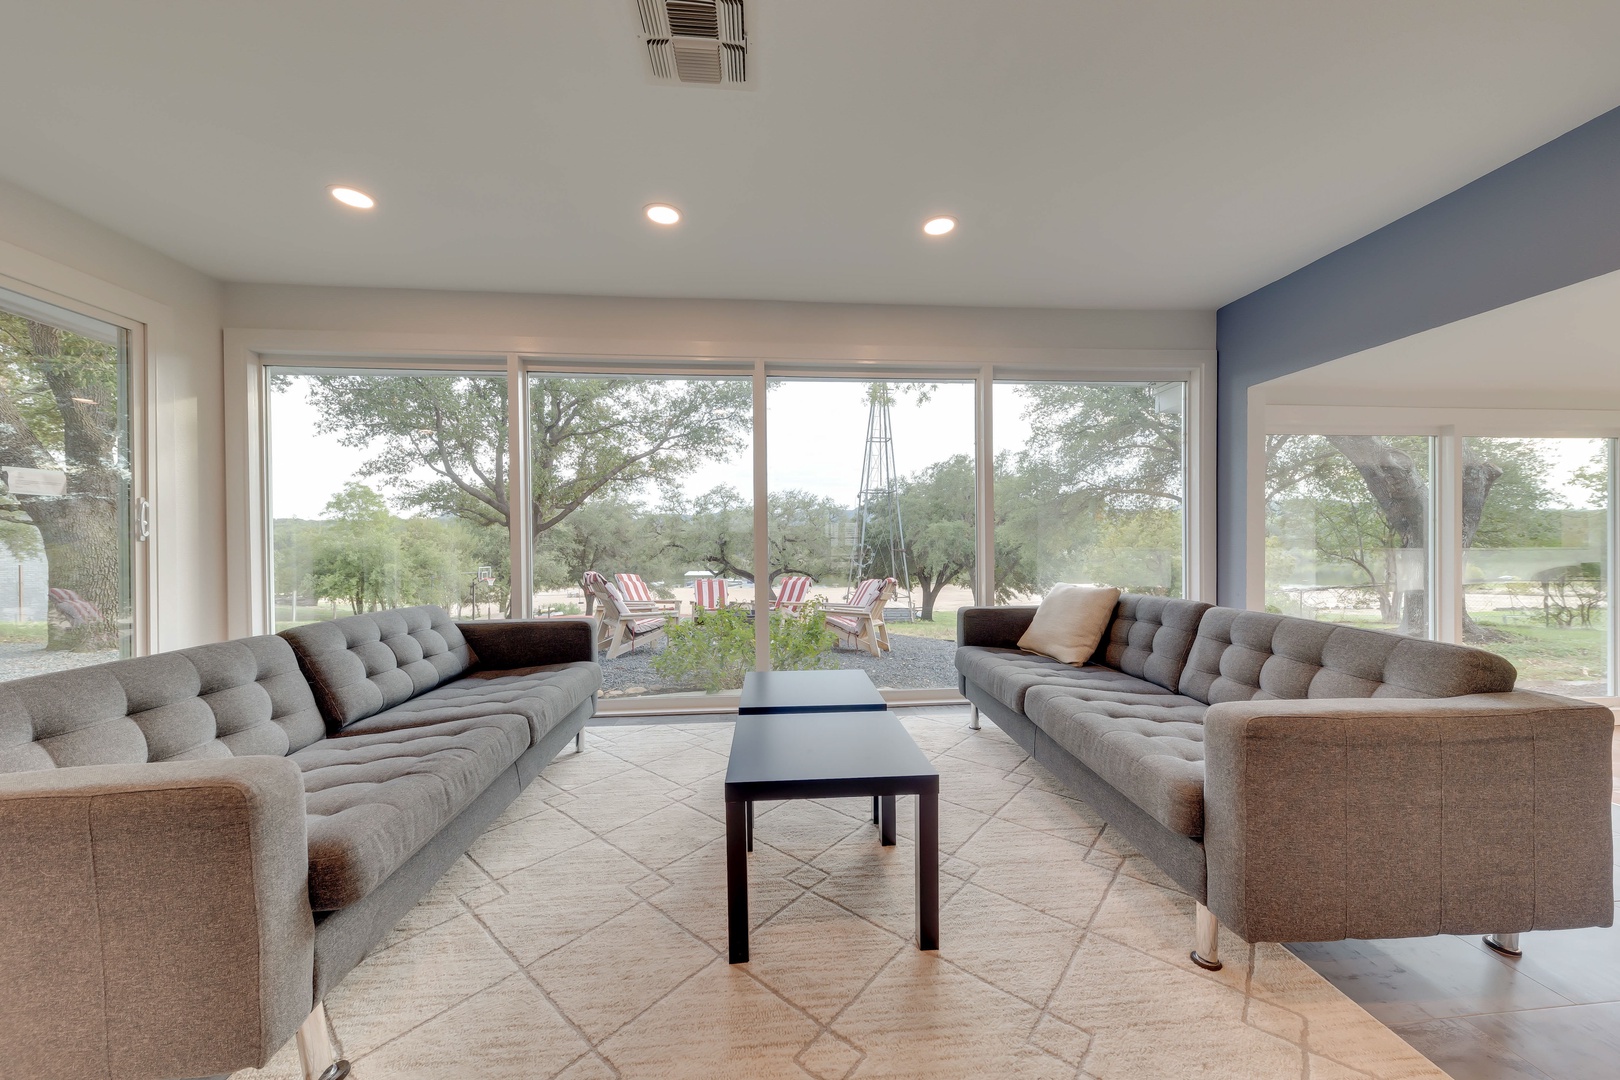 The entire family can relax and dine in the open living & dining areas